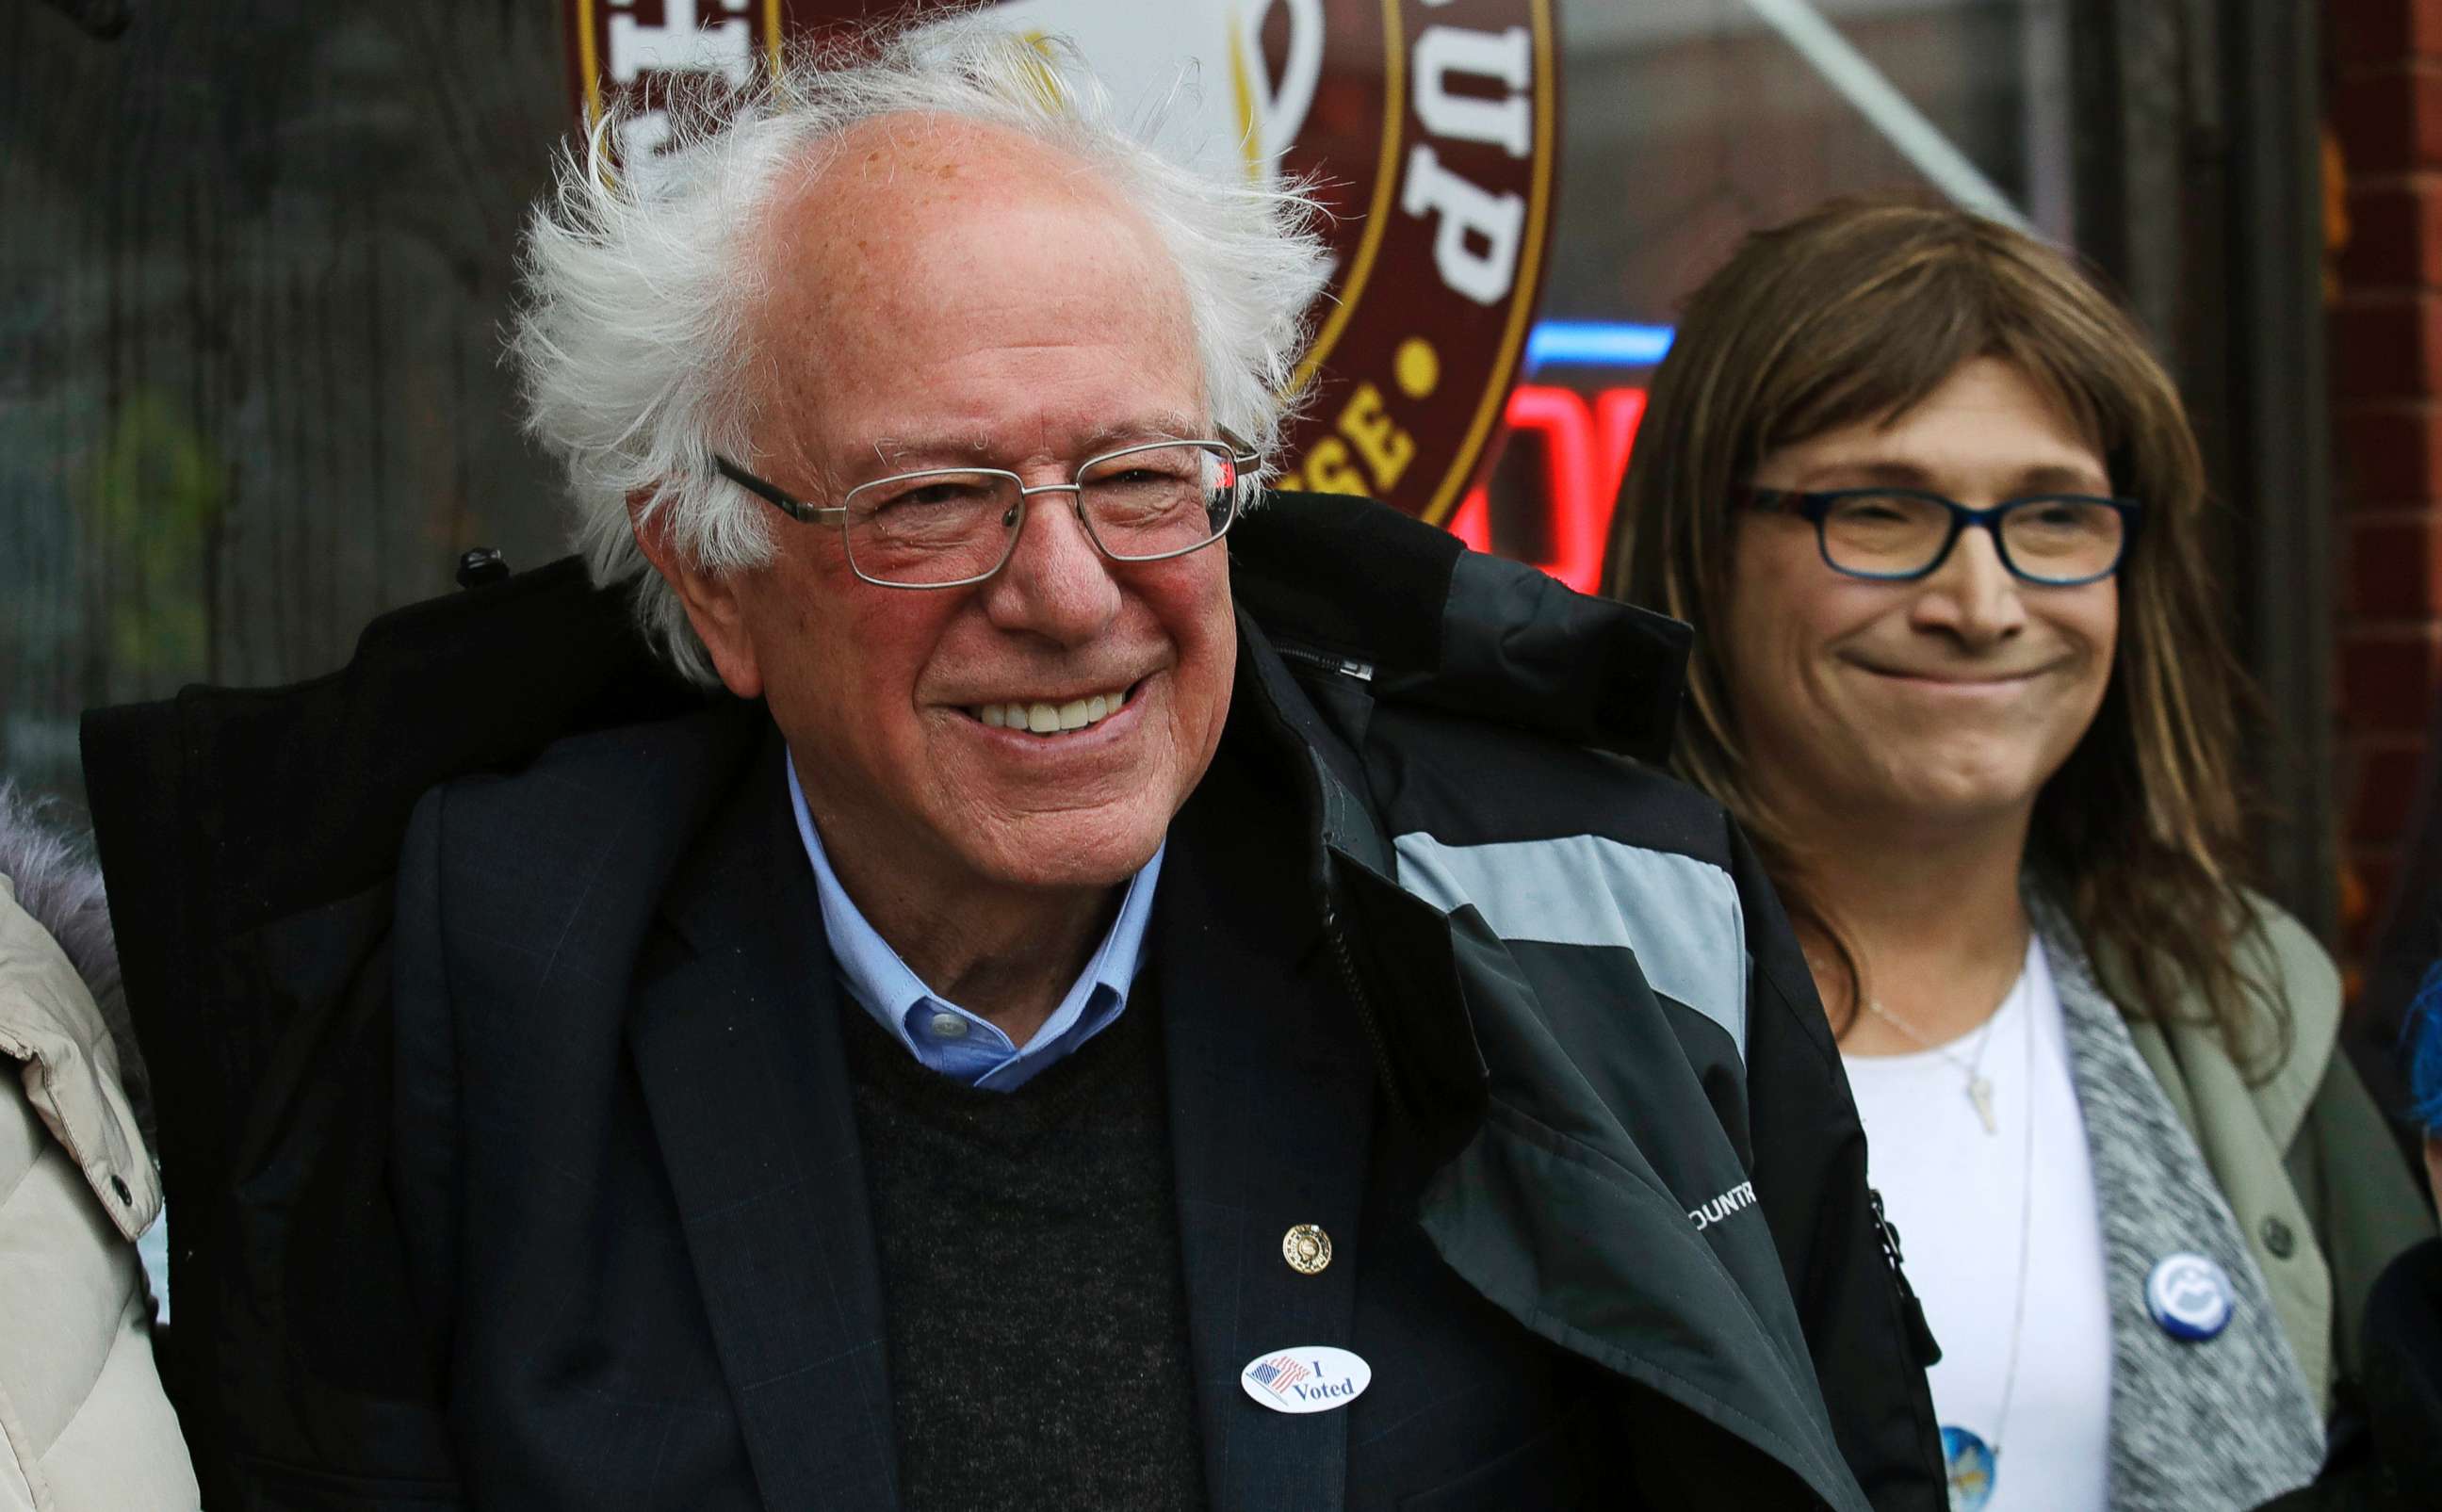 PHOTO: Sen. Bernie Sanders smiles as he poses for a photograph with Vermont Democratic gubernatorial candidate Christine Hallquist outside City Hall in Saint Albans, Vt., Nov. 6, 2018.